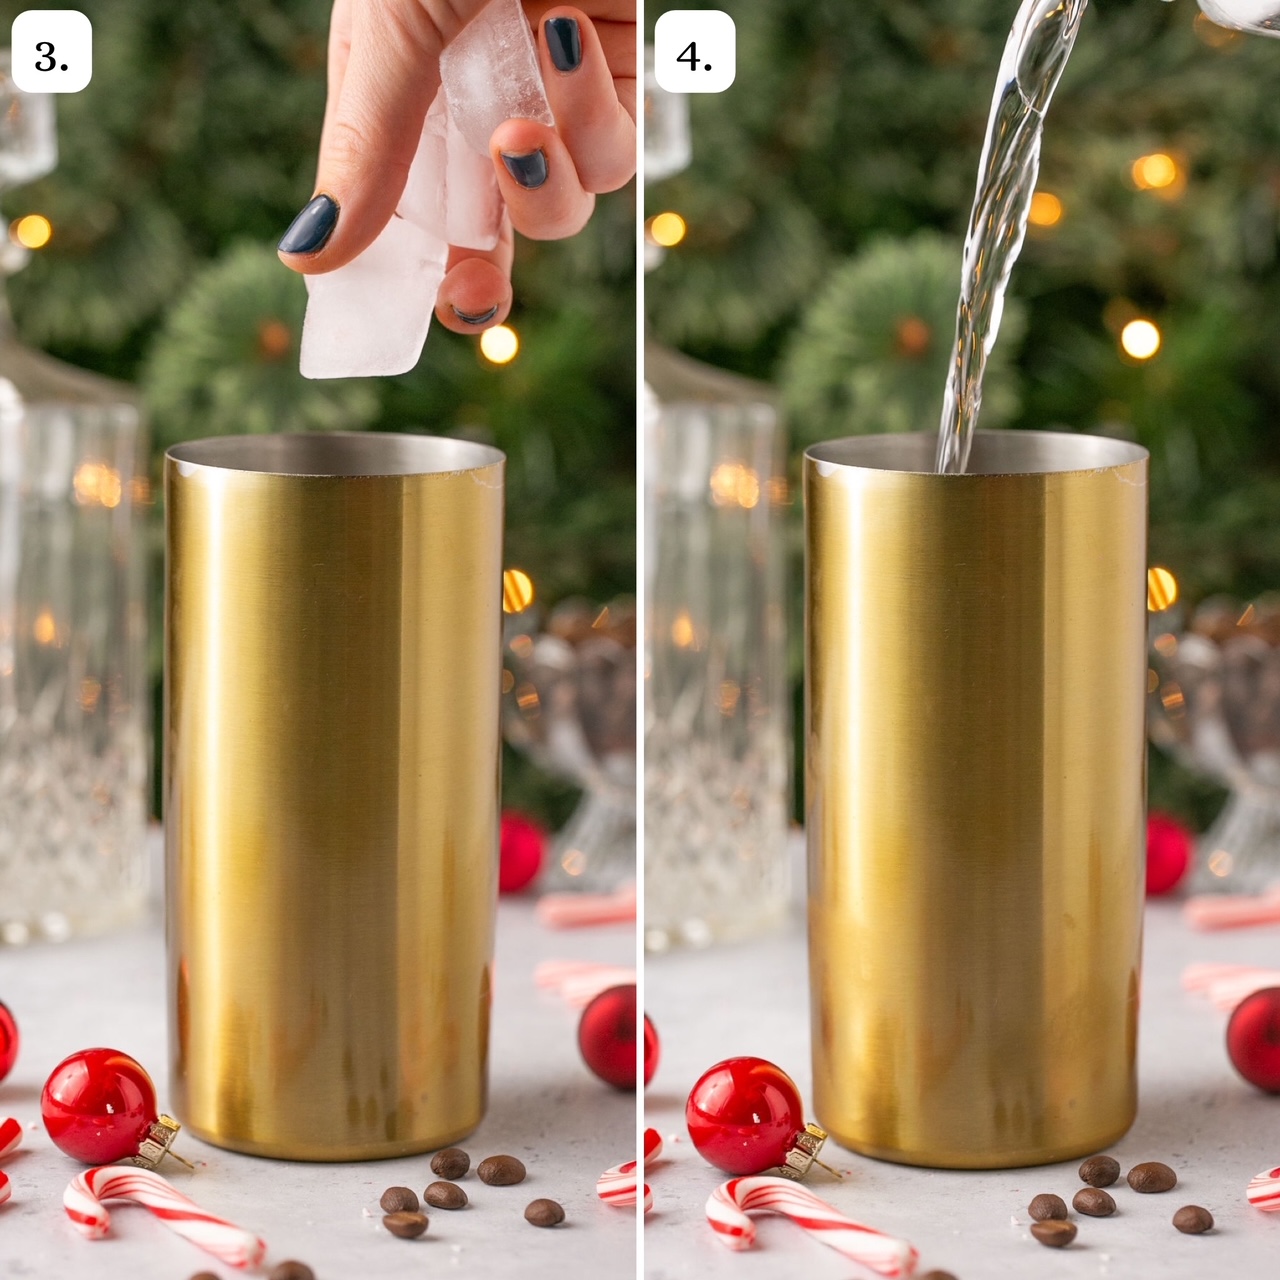 steps 3 and 4 for making peppermint espresso martinis